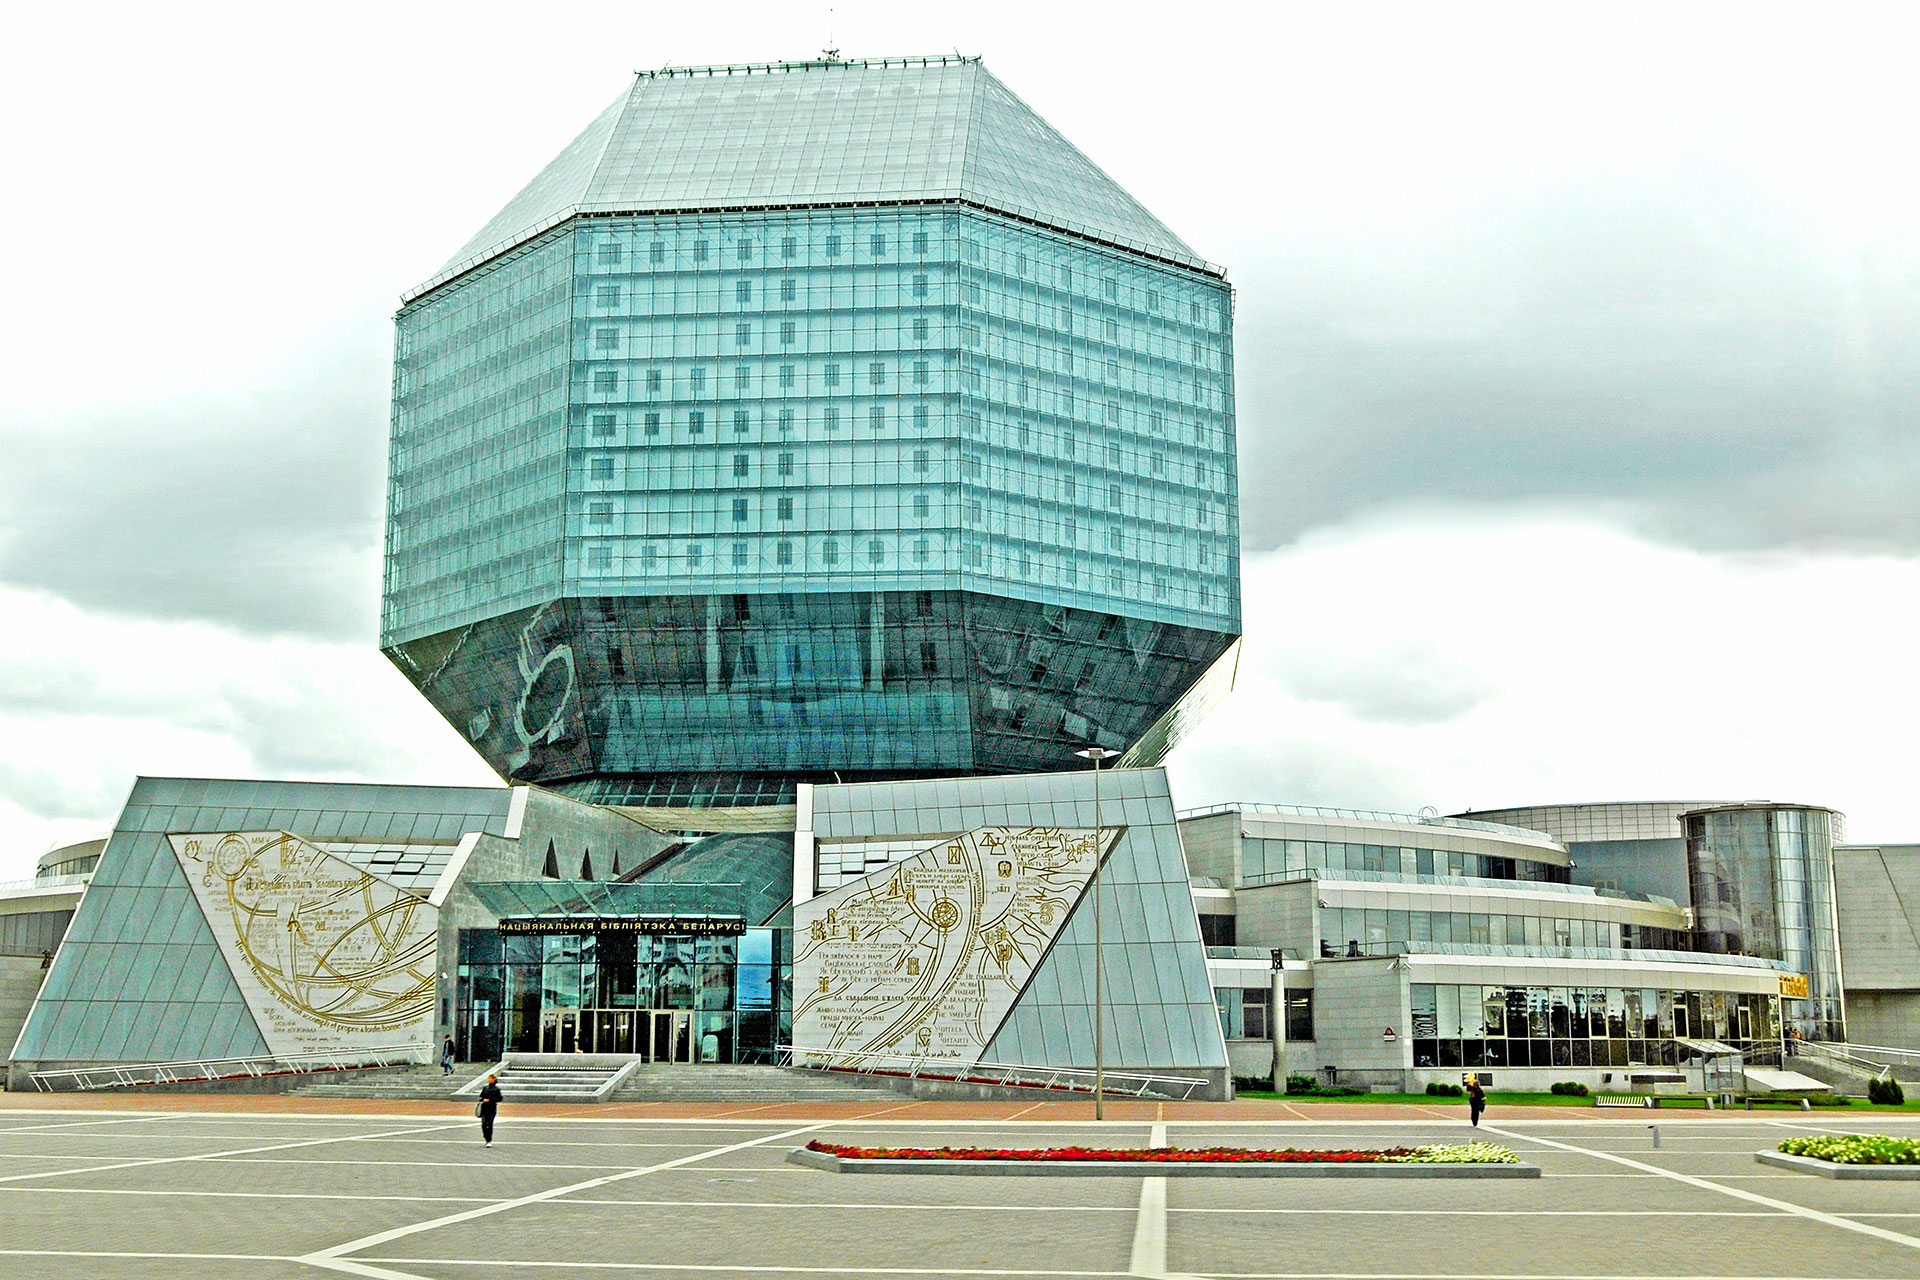 The National Library of Belarus. Image: Dennis Jarvis under a CC licence